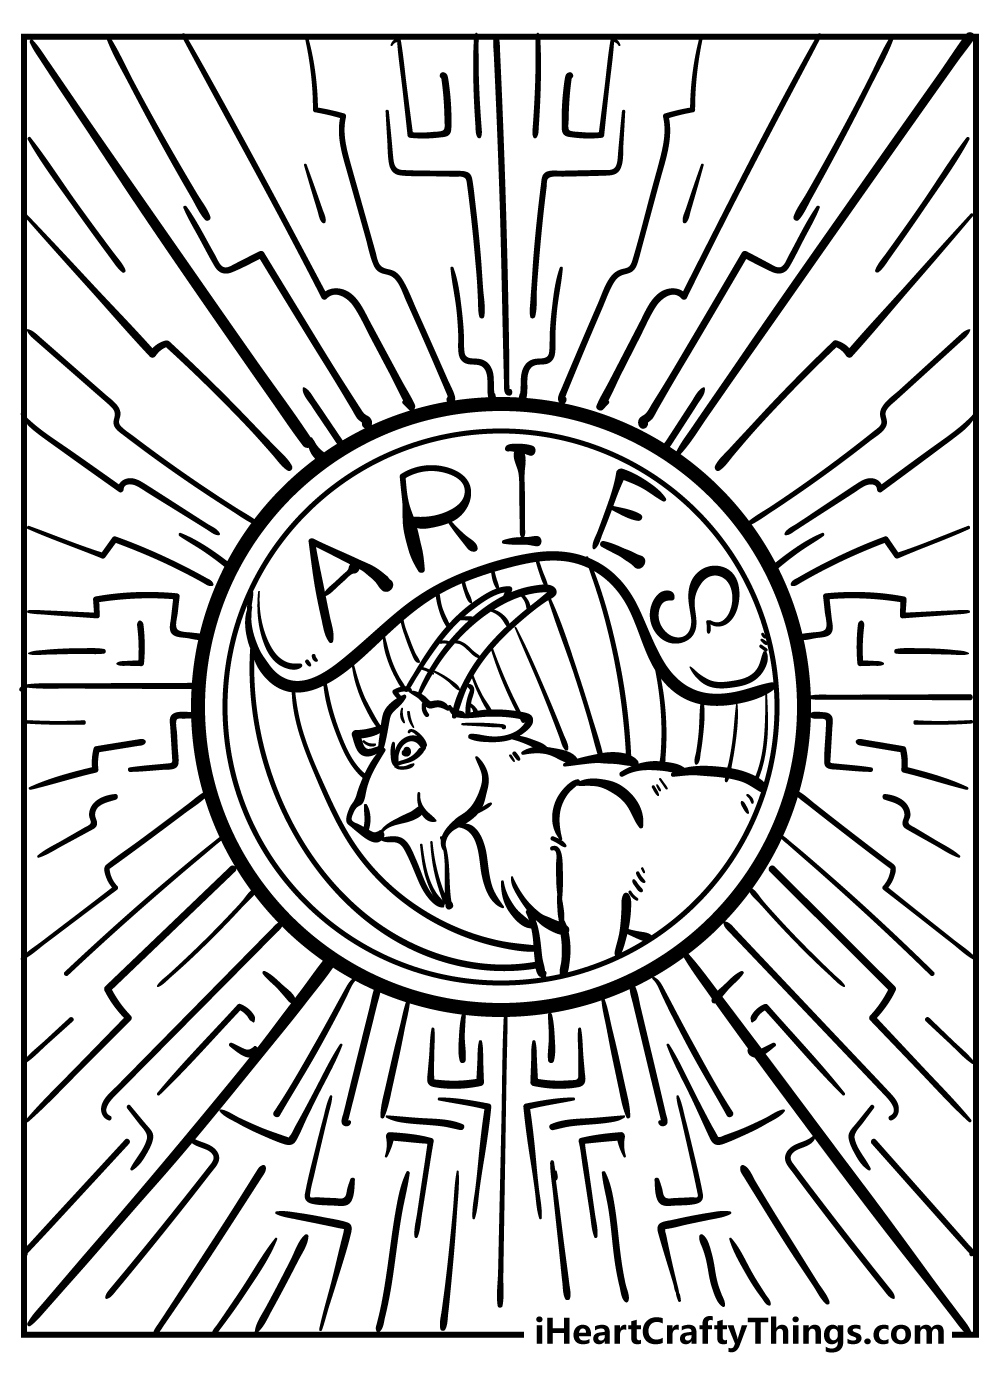 Zodiac Sign Coloring Sheet for children free download